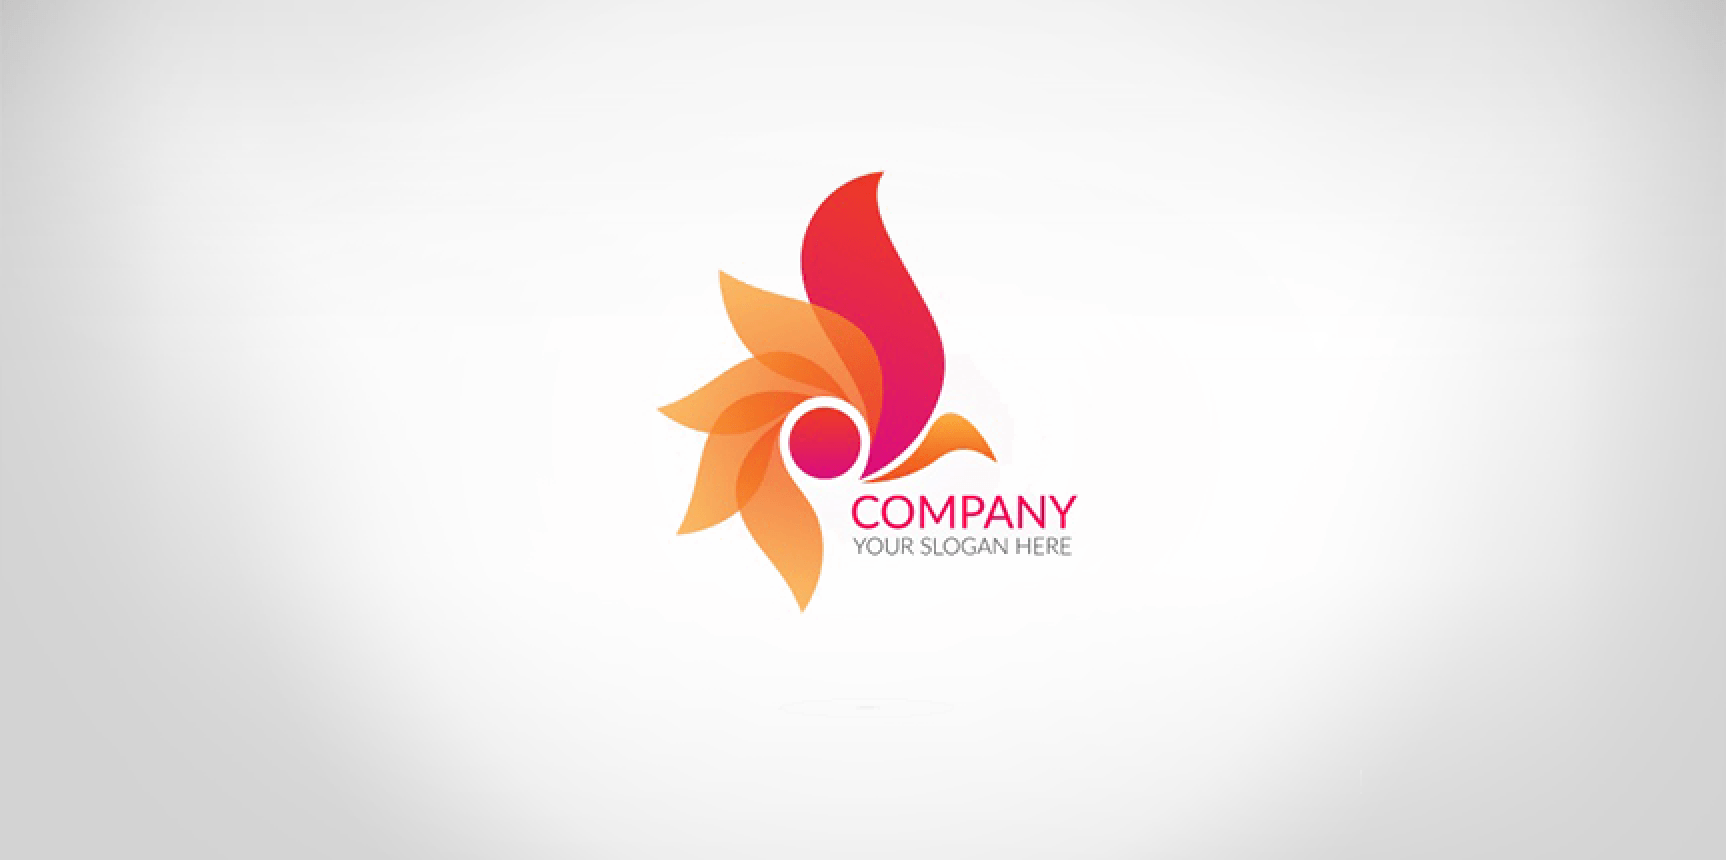 Comapny Logo - High-Growth Company Logos Have These Attributes In Common - Somebody ...